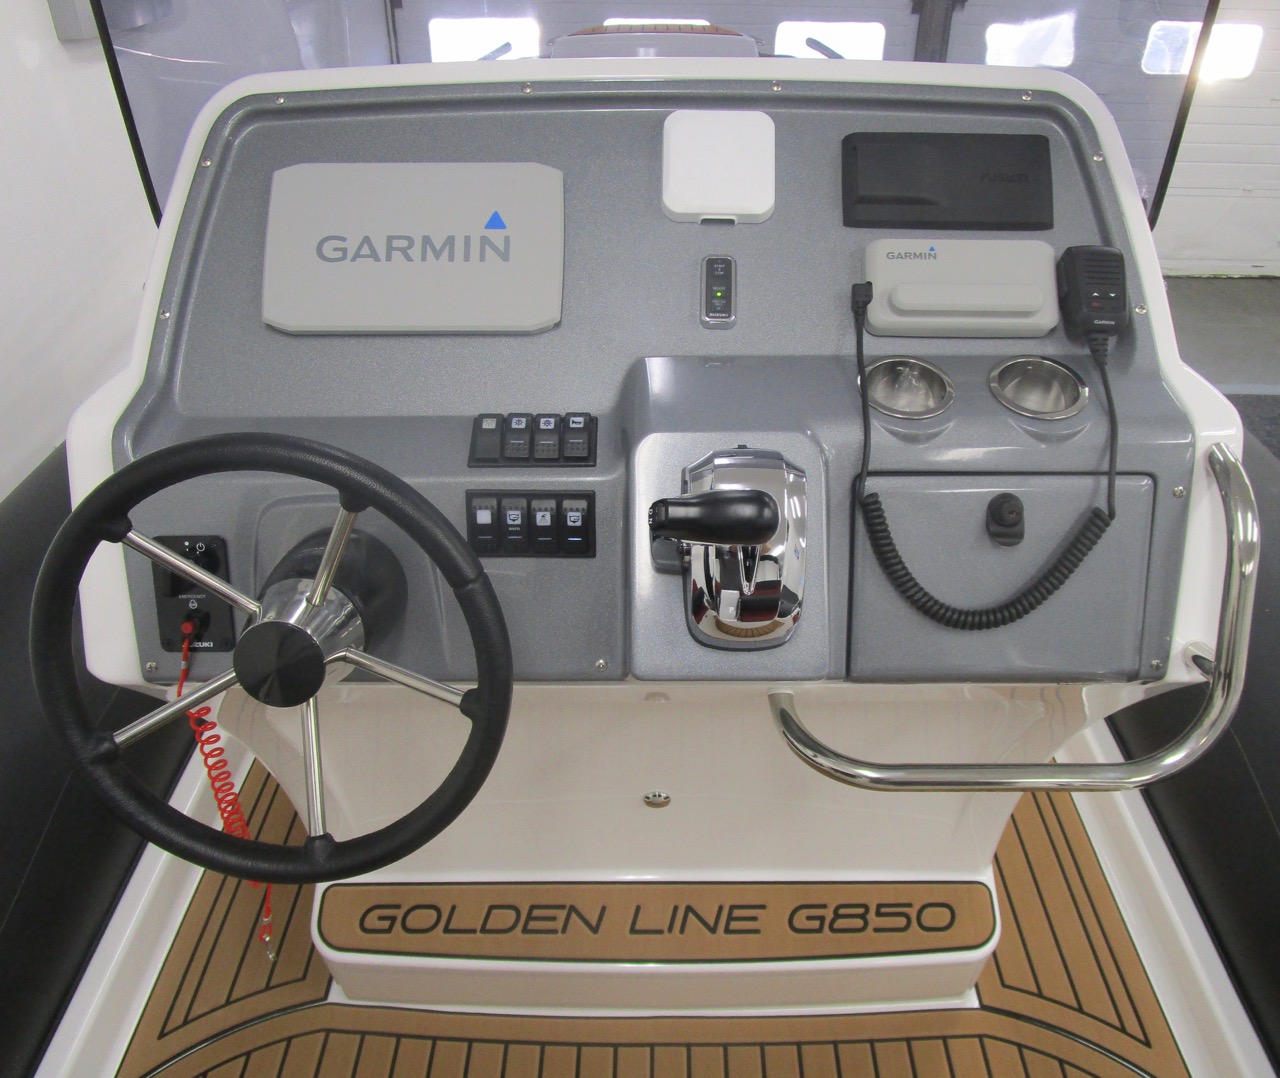 GRAND G850 RIB console instrument covers on